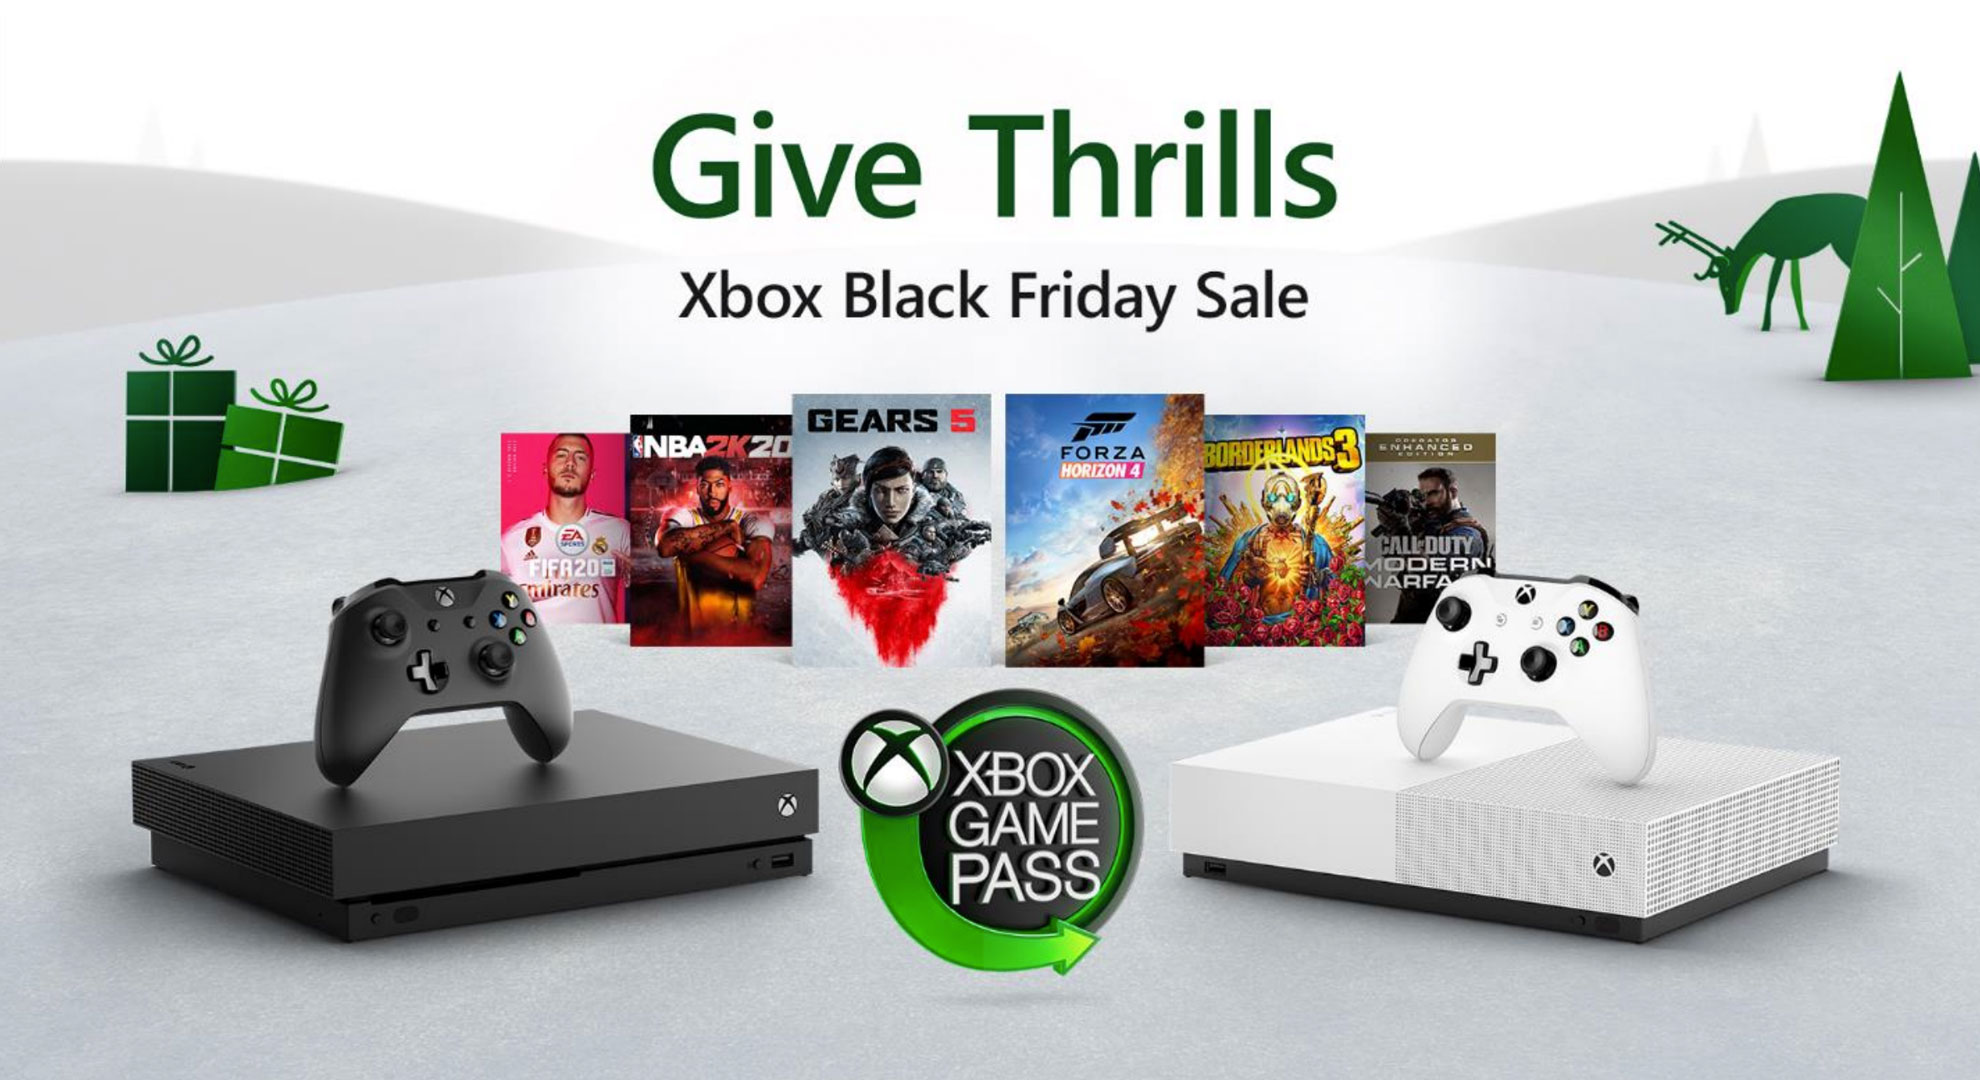 Xbox One Black Friday deals knock $150 off consoles in massive sale - Will The Xbox One Have Black Friday Deal